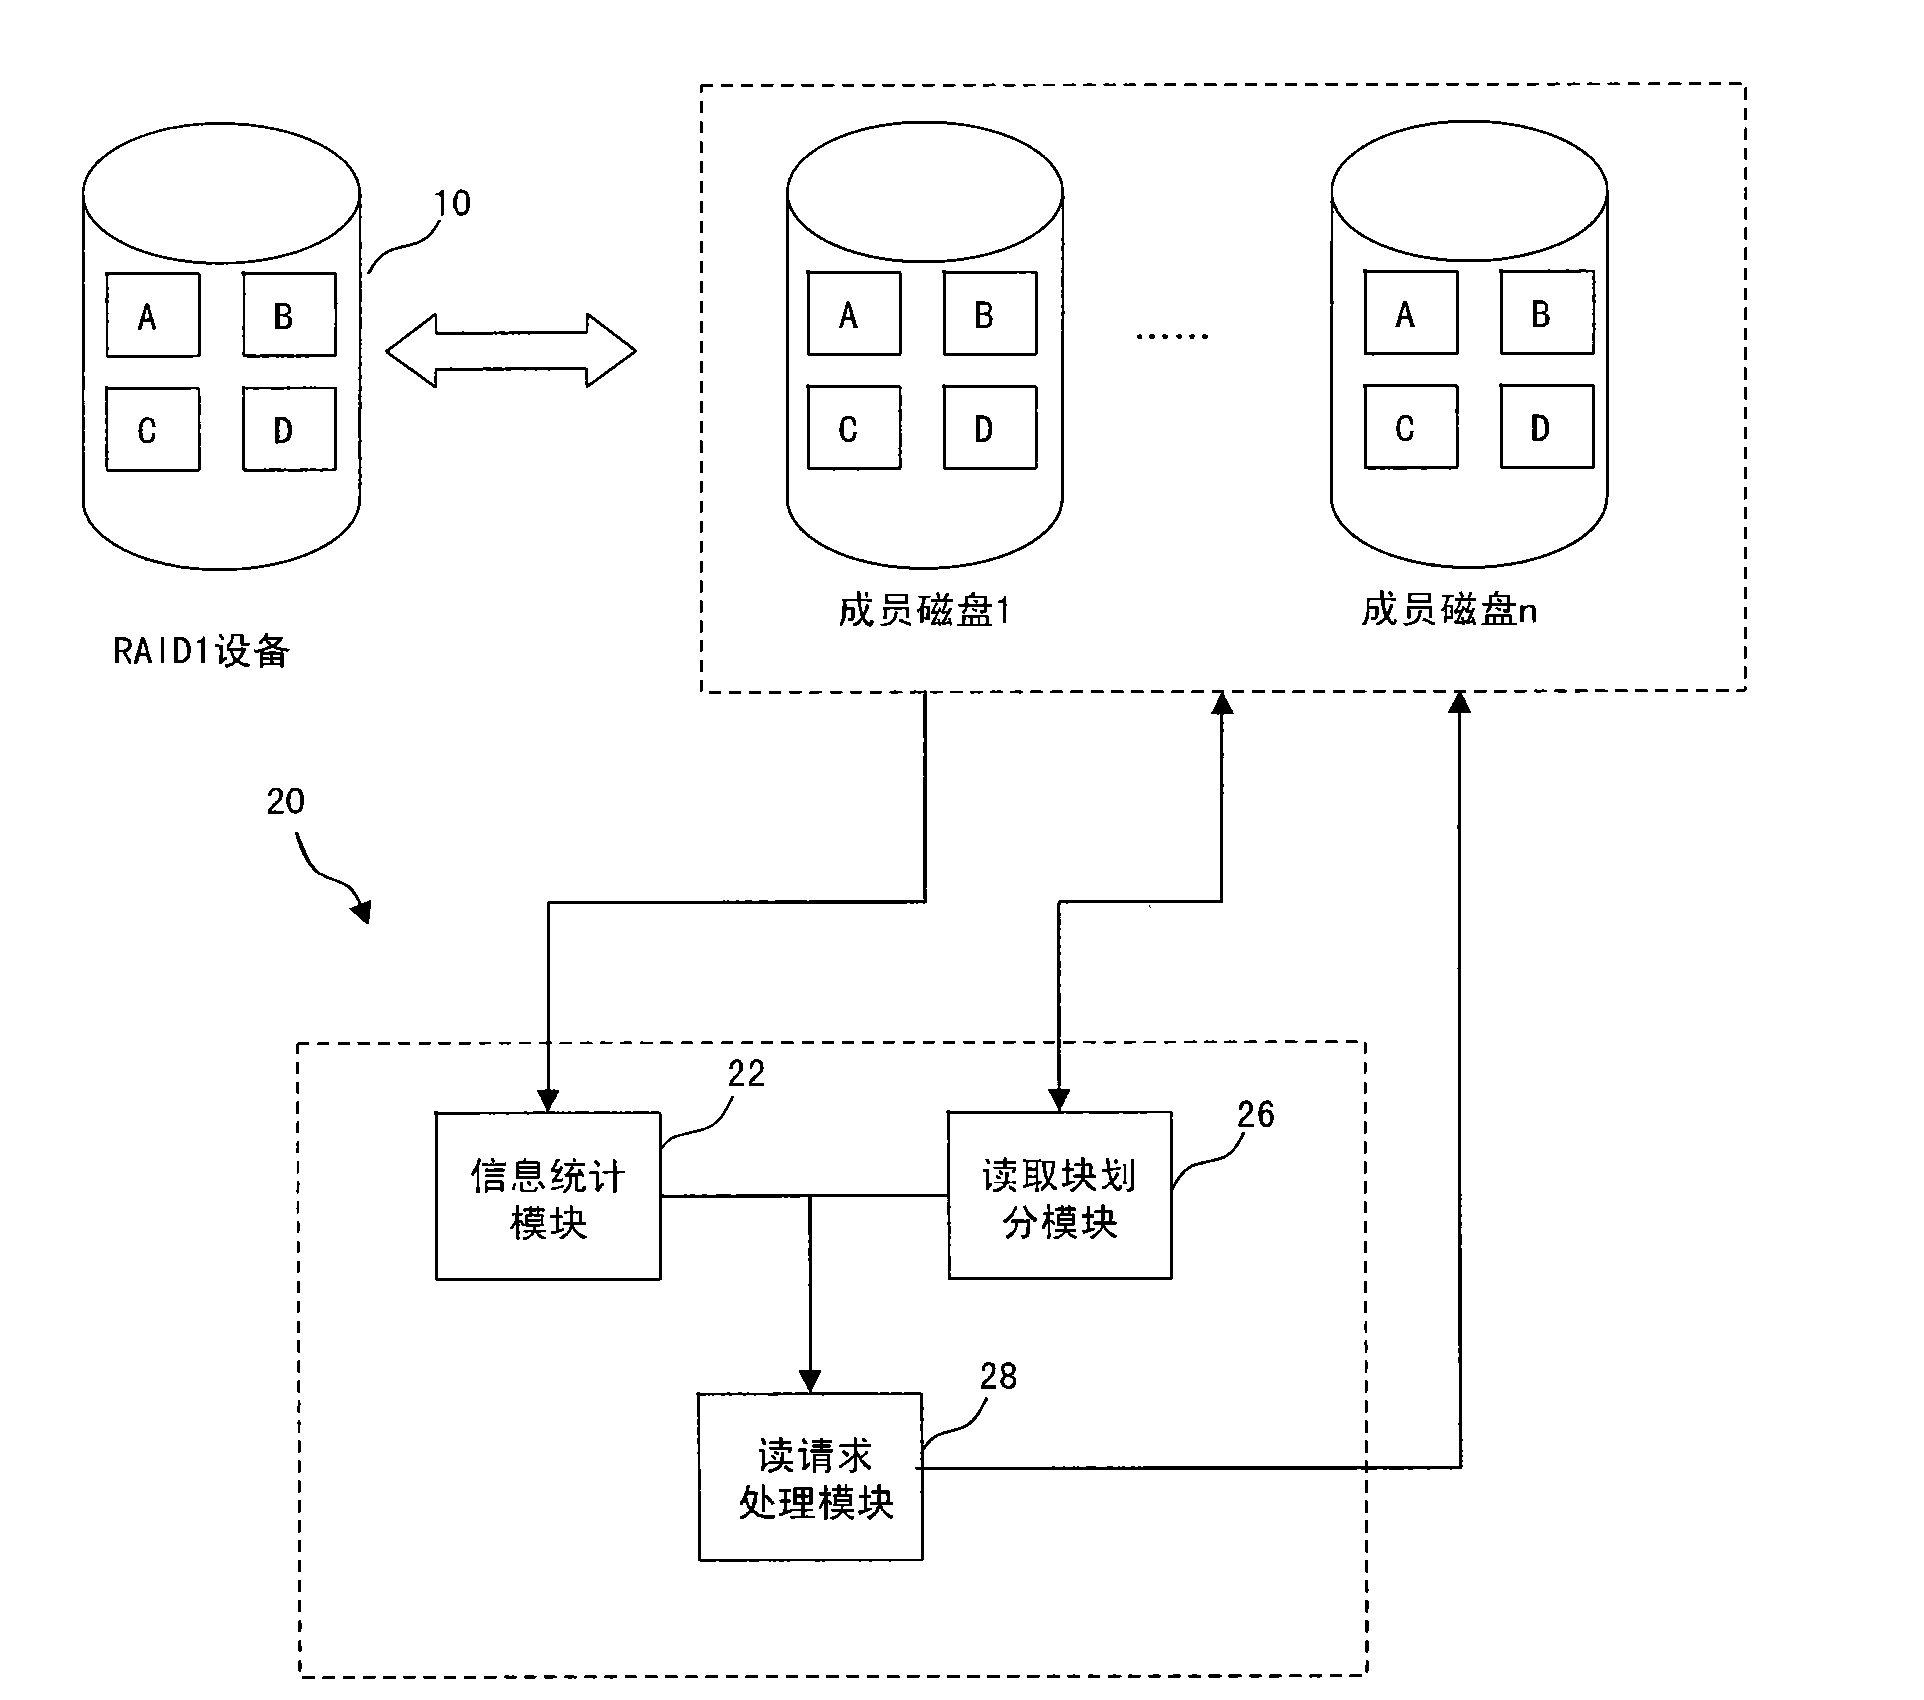 Method and device for reading RAID1 (Redundant Array of Inexpensive Disk 1) equipment